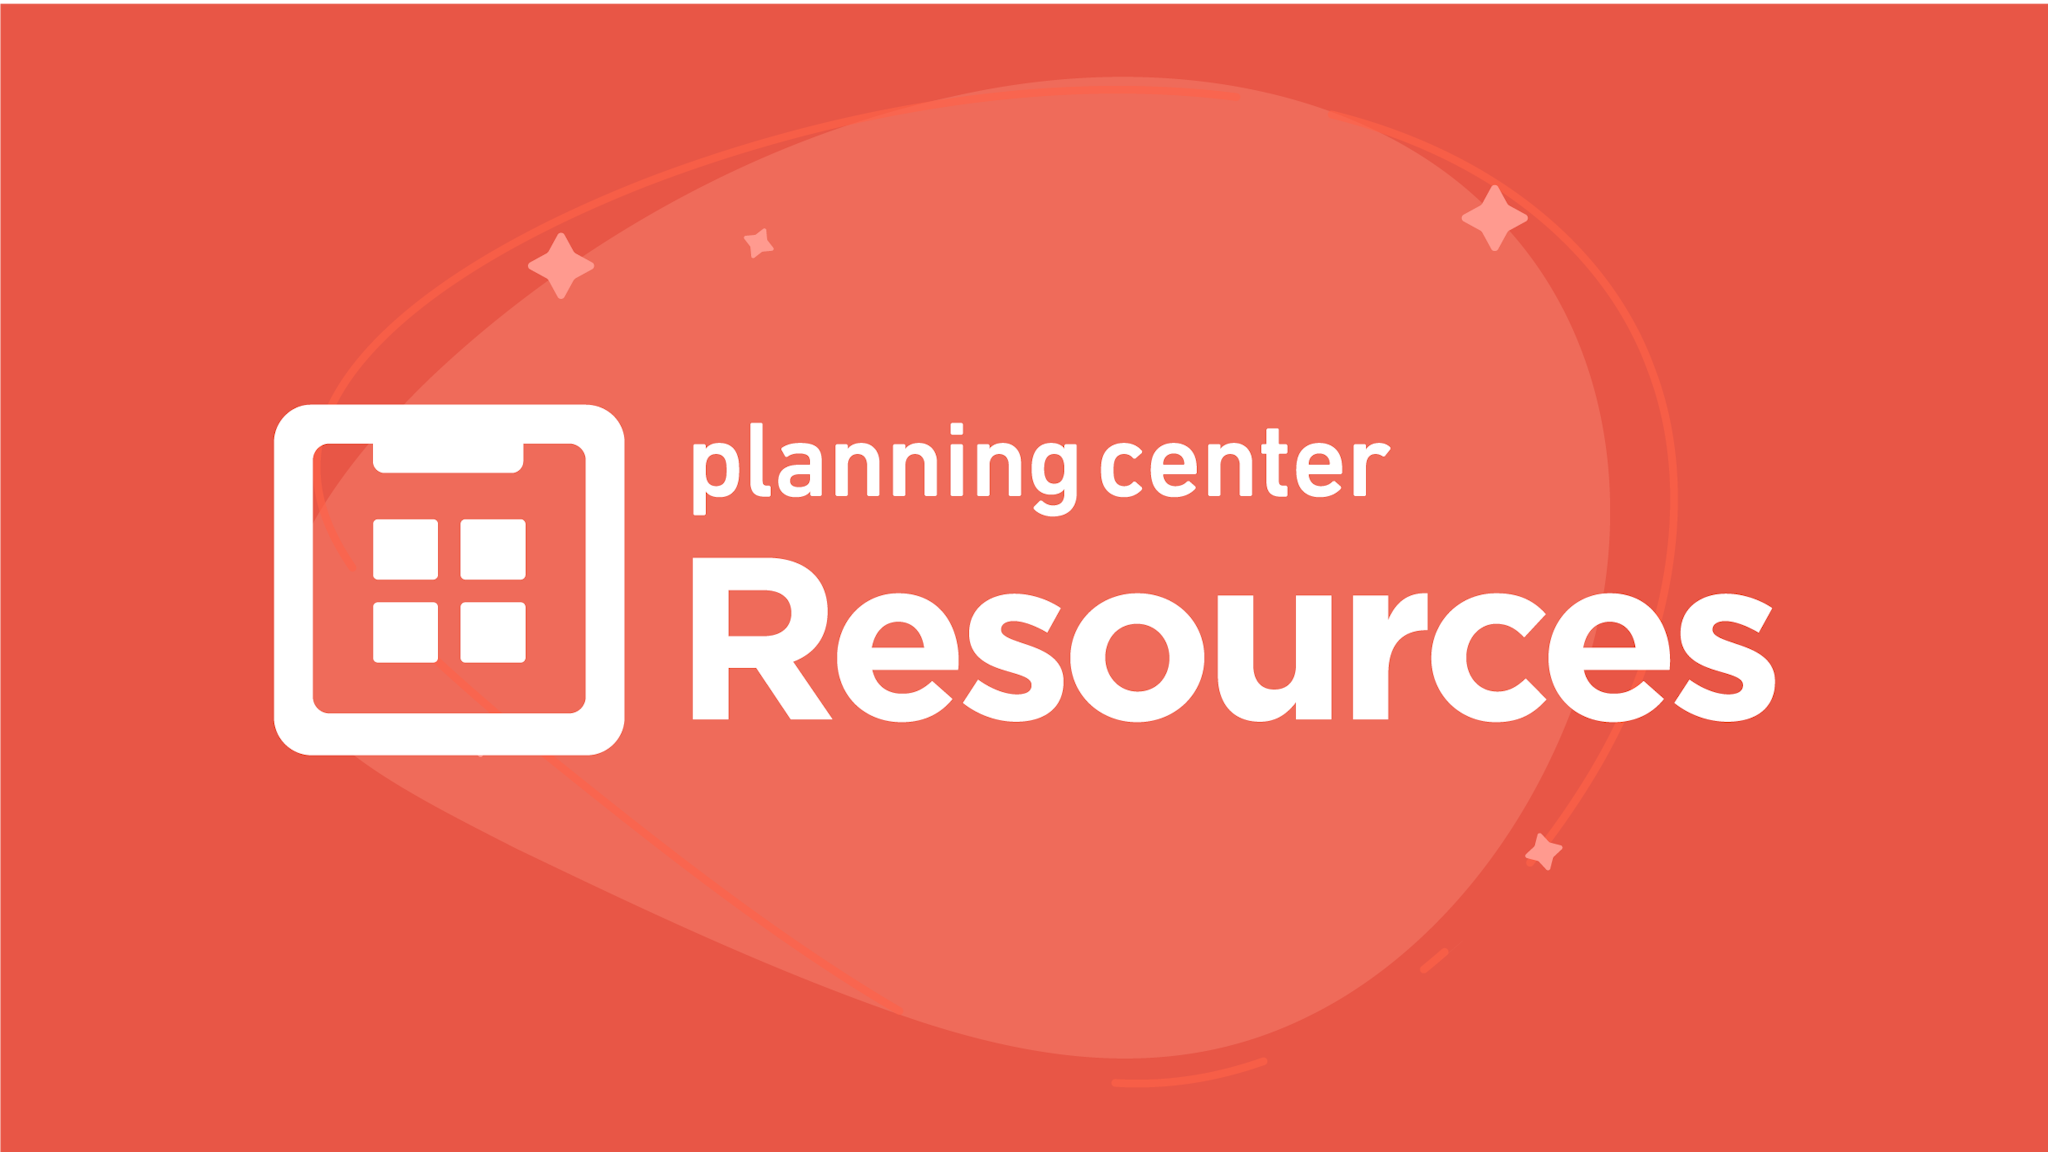 The Planning Center Resources typeface in white against a red background.